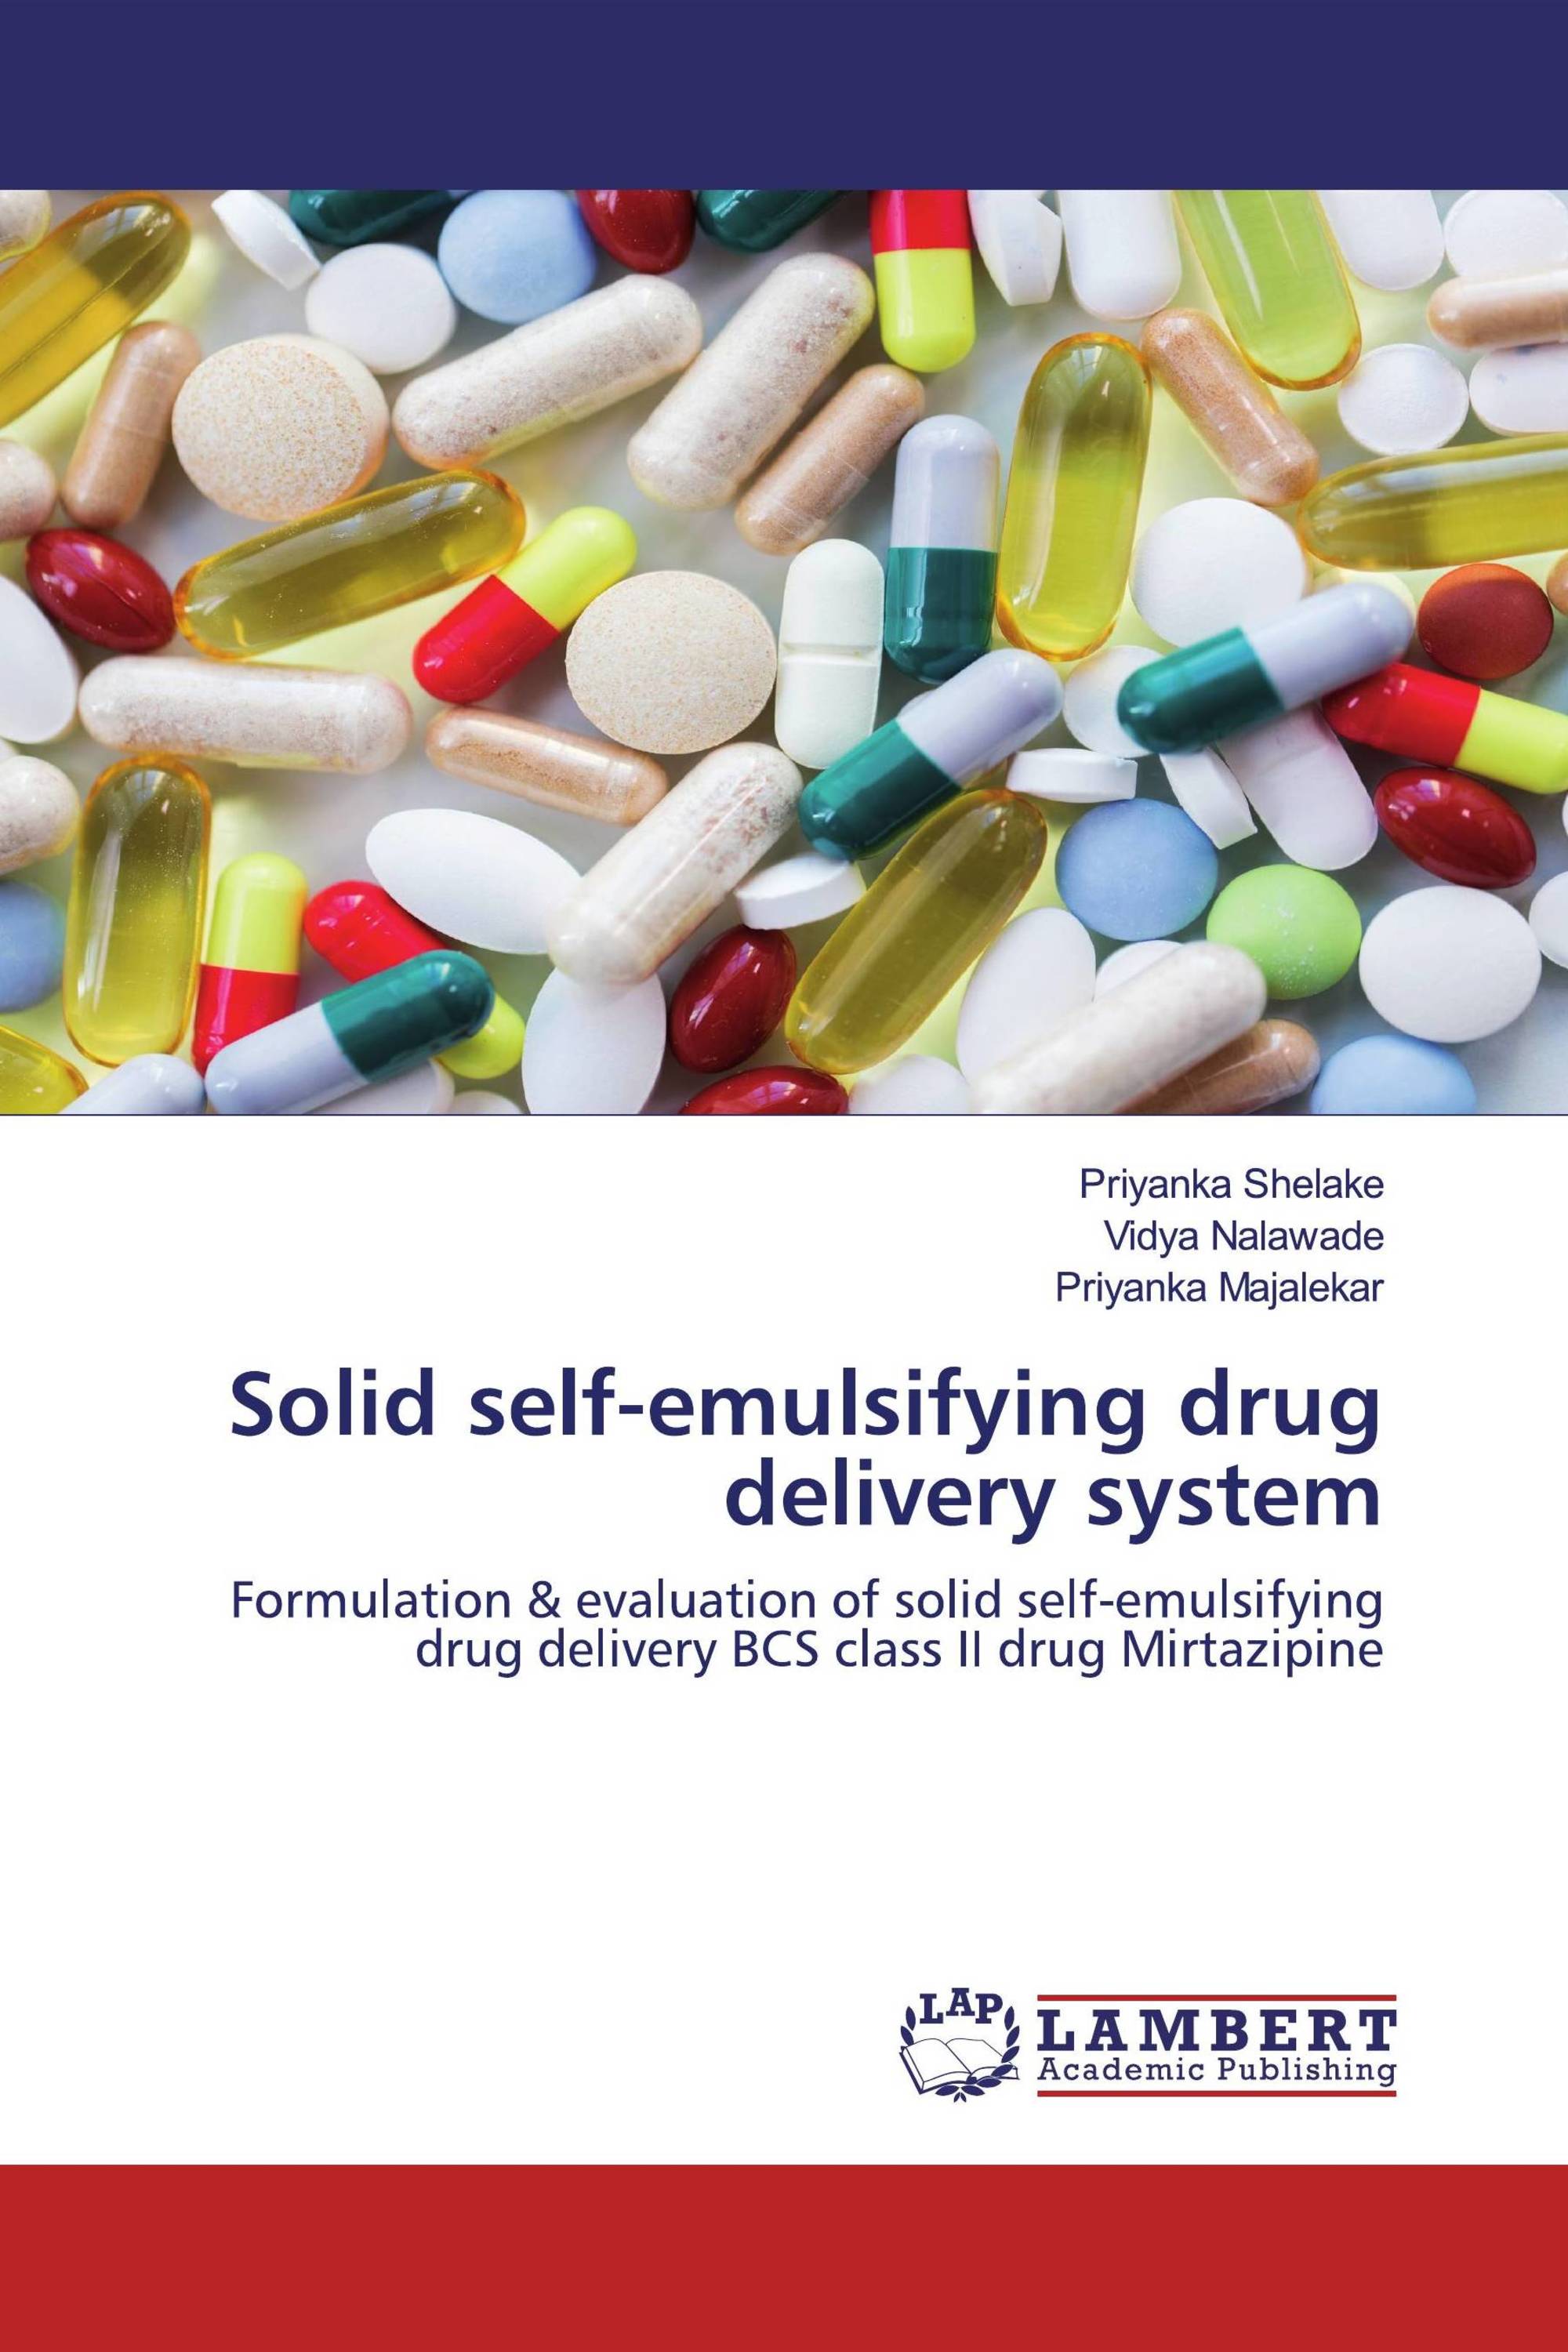 research article on self emulsifying drug delivery system